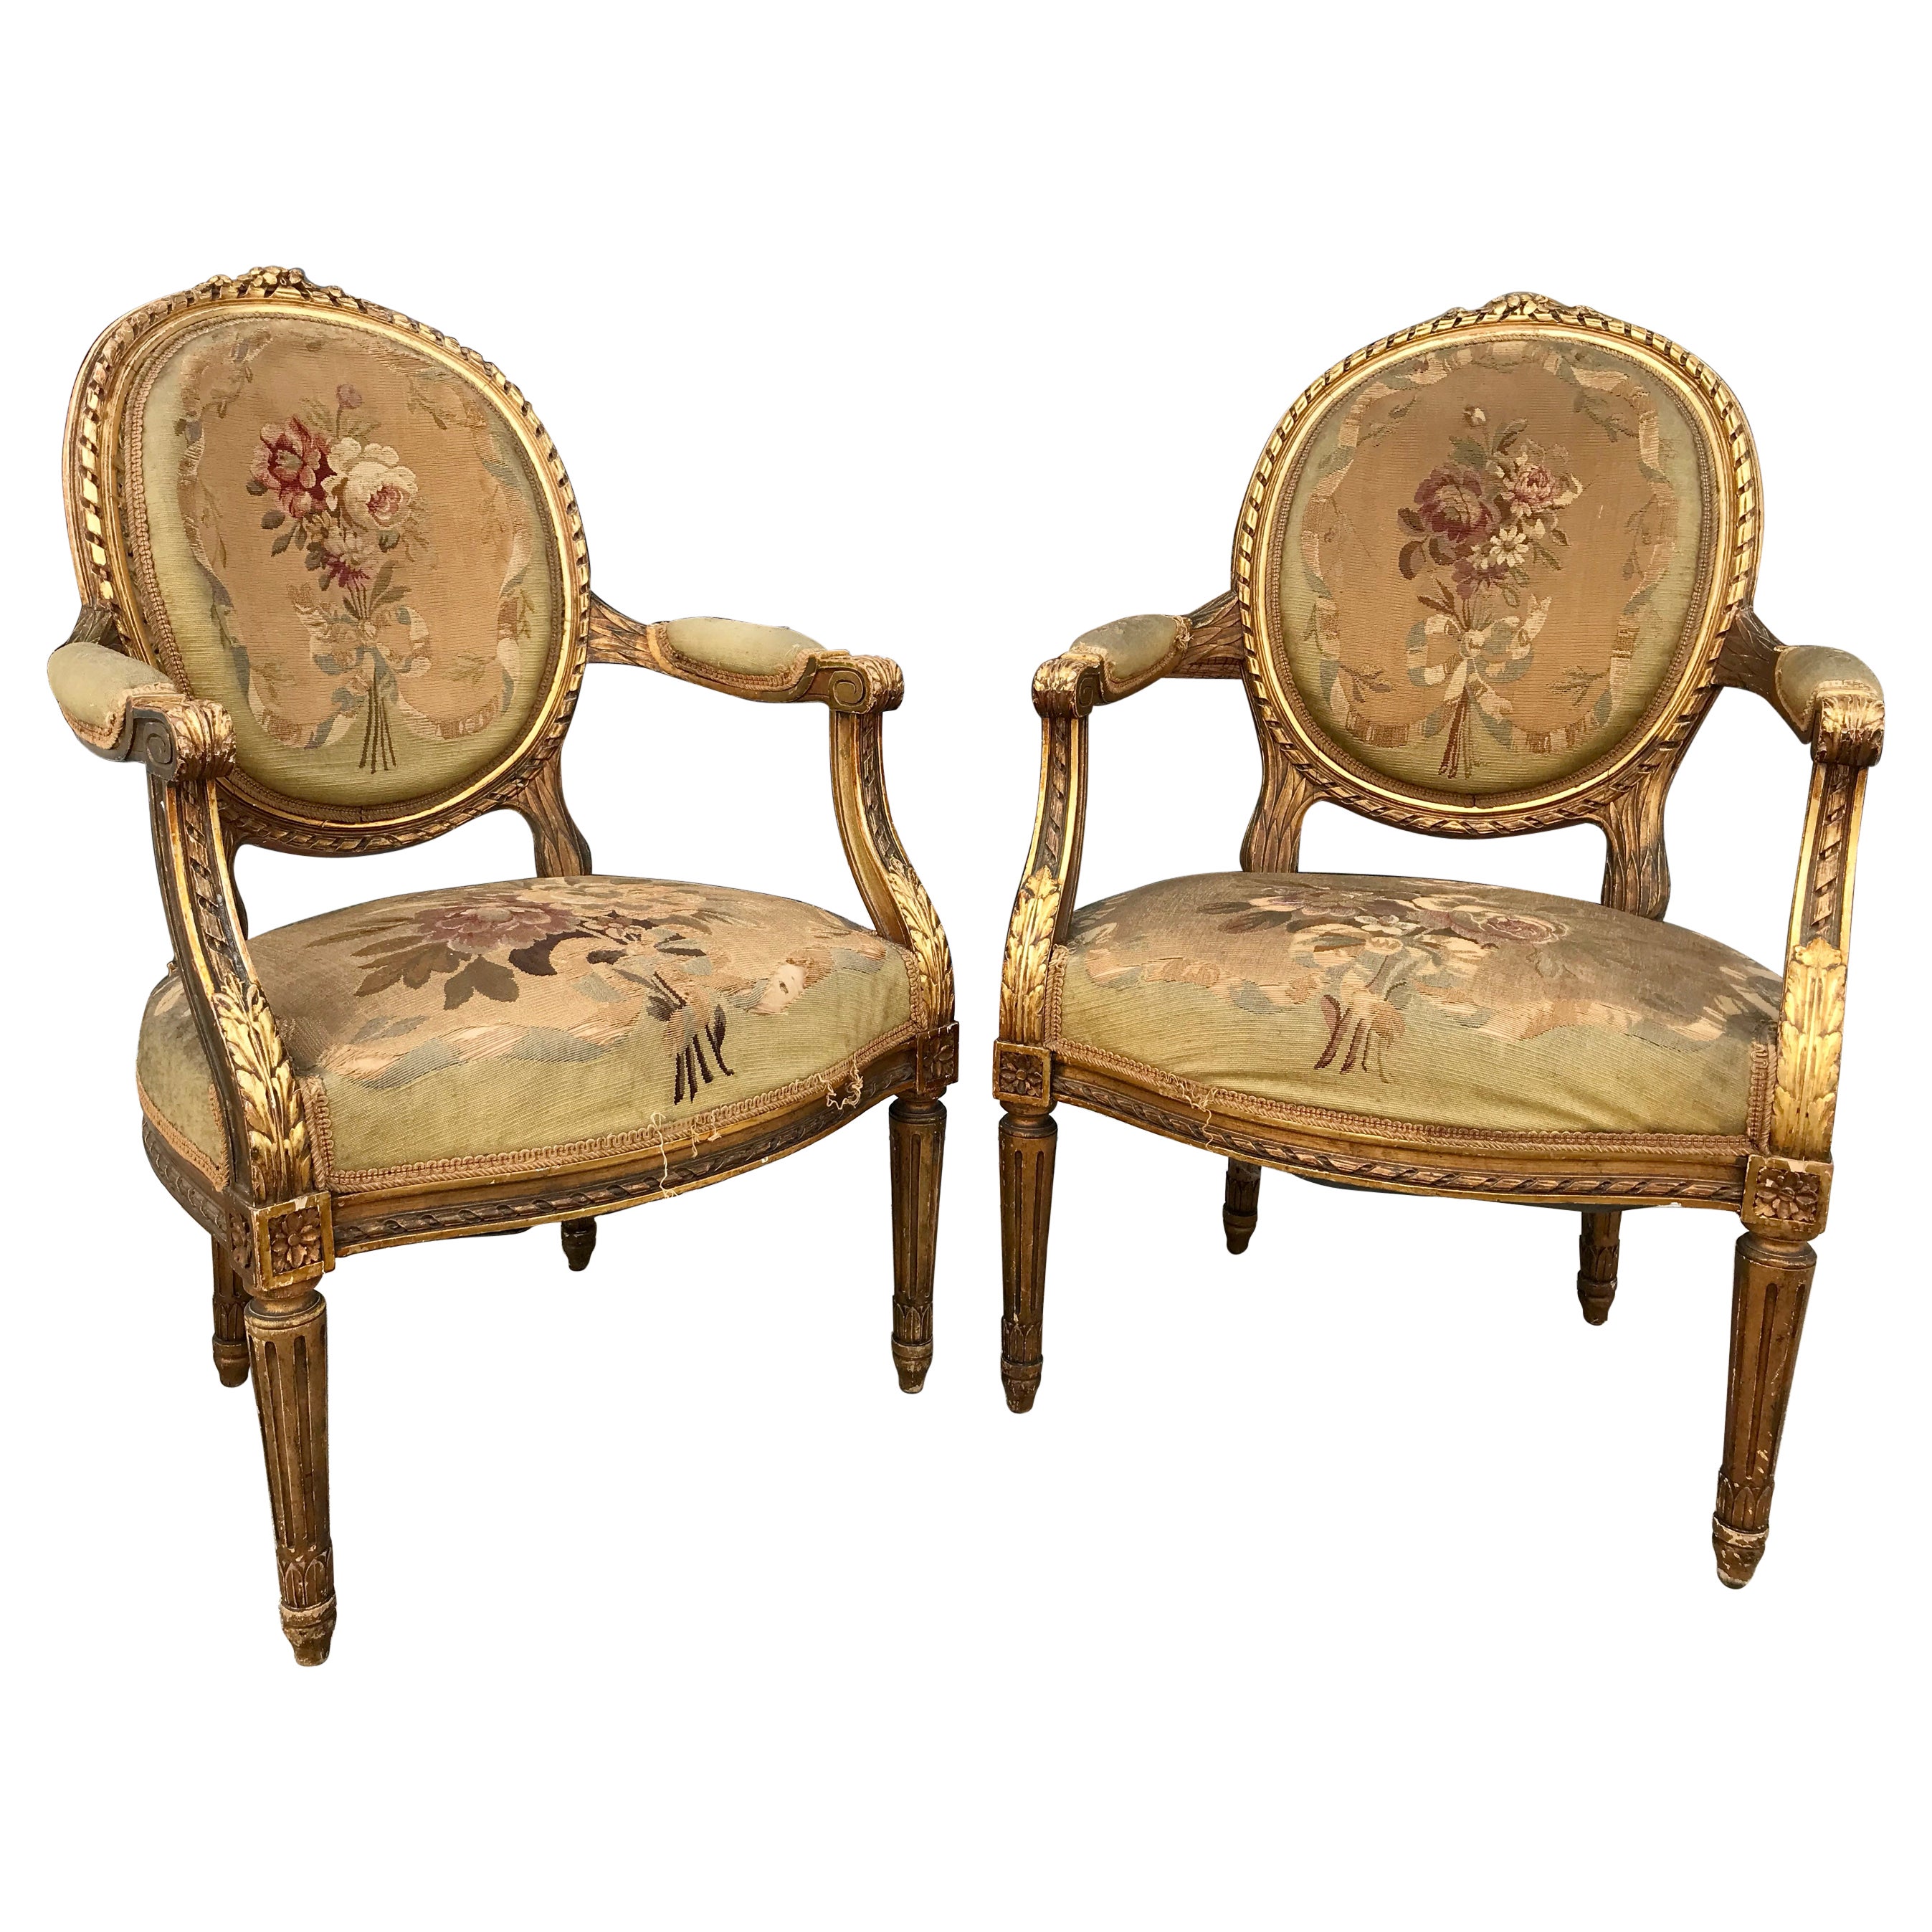 Pair of 19th Century Louis XVI Gilded Arm Chairs